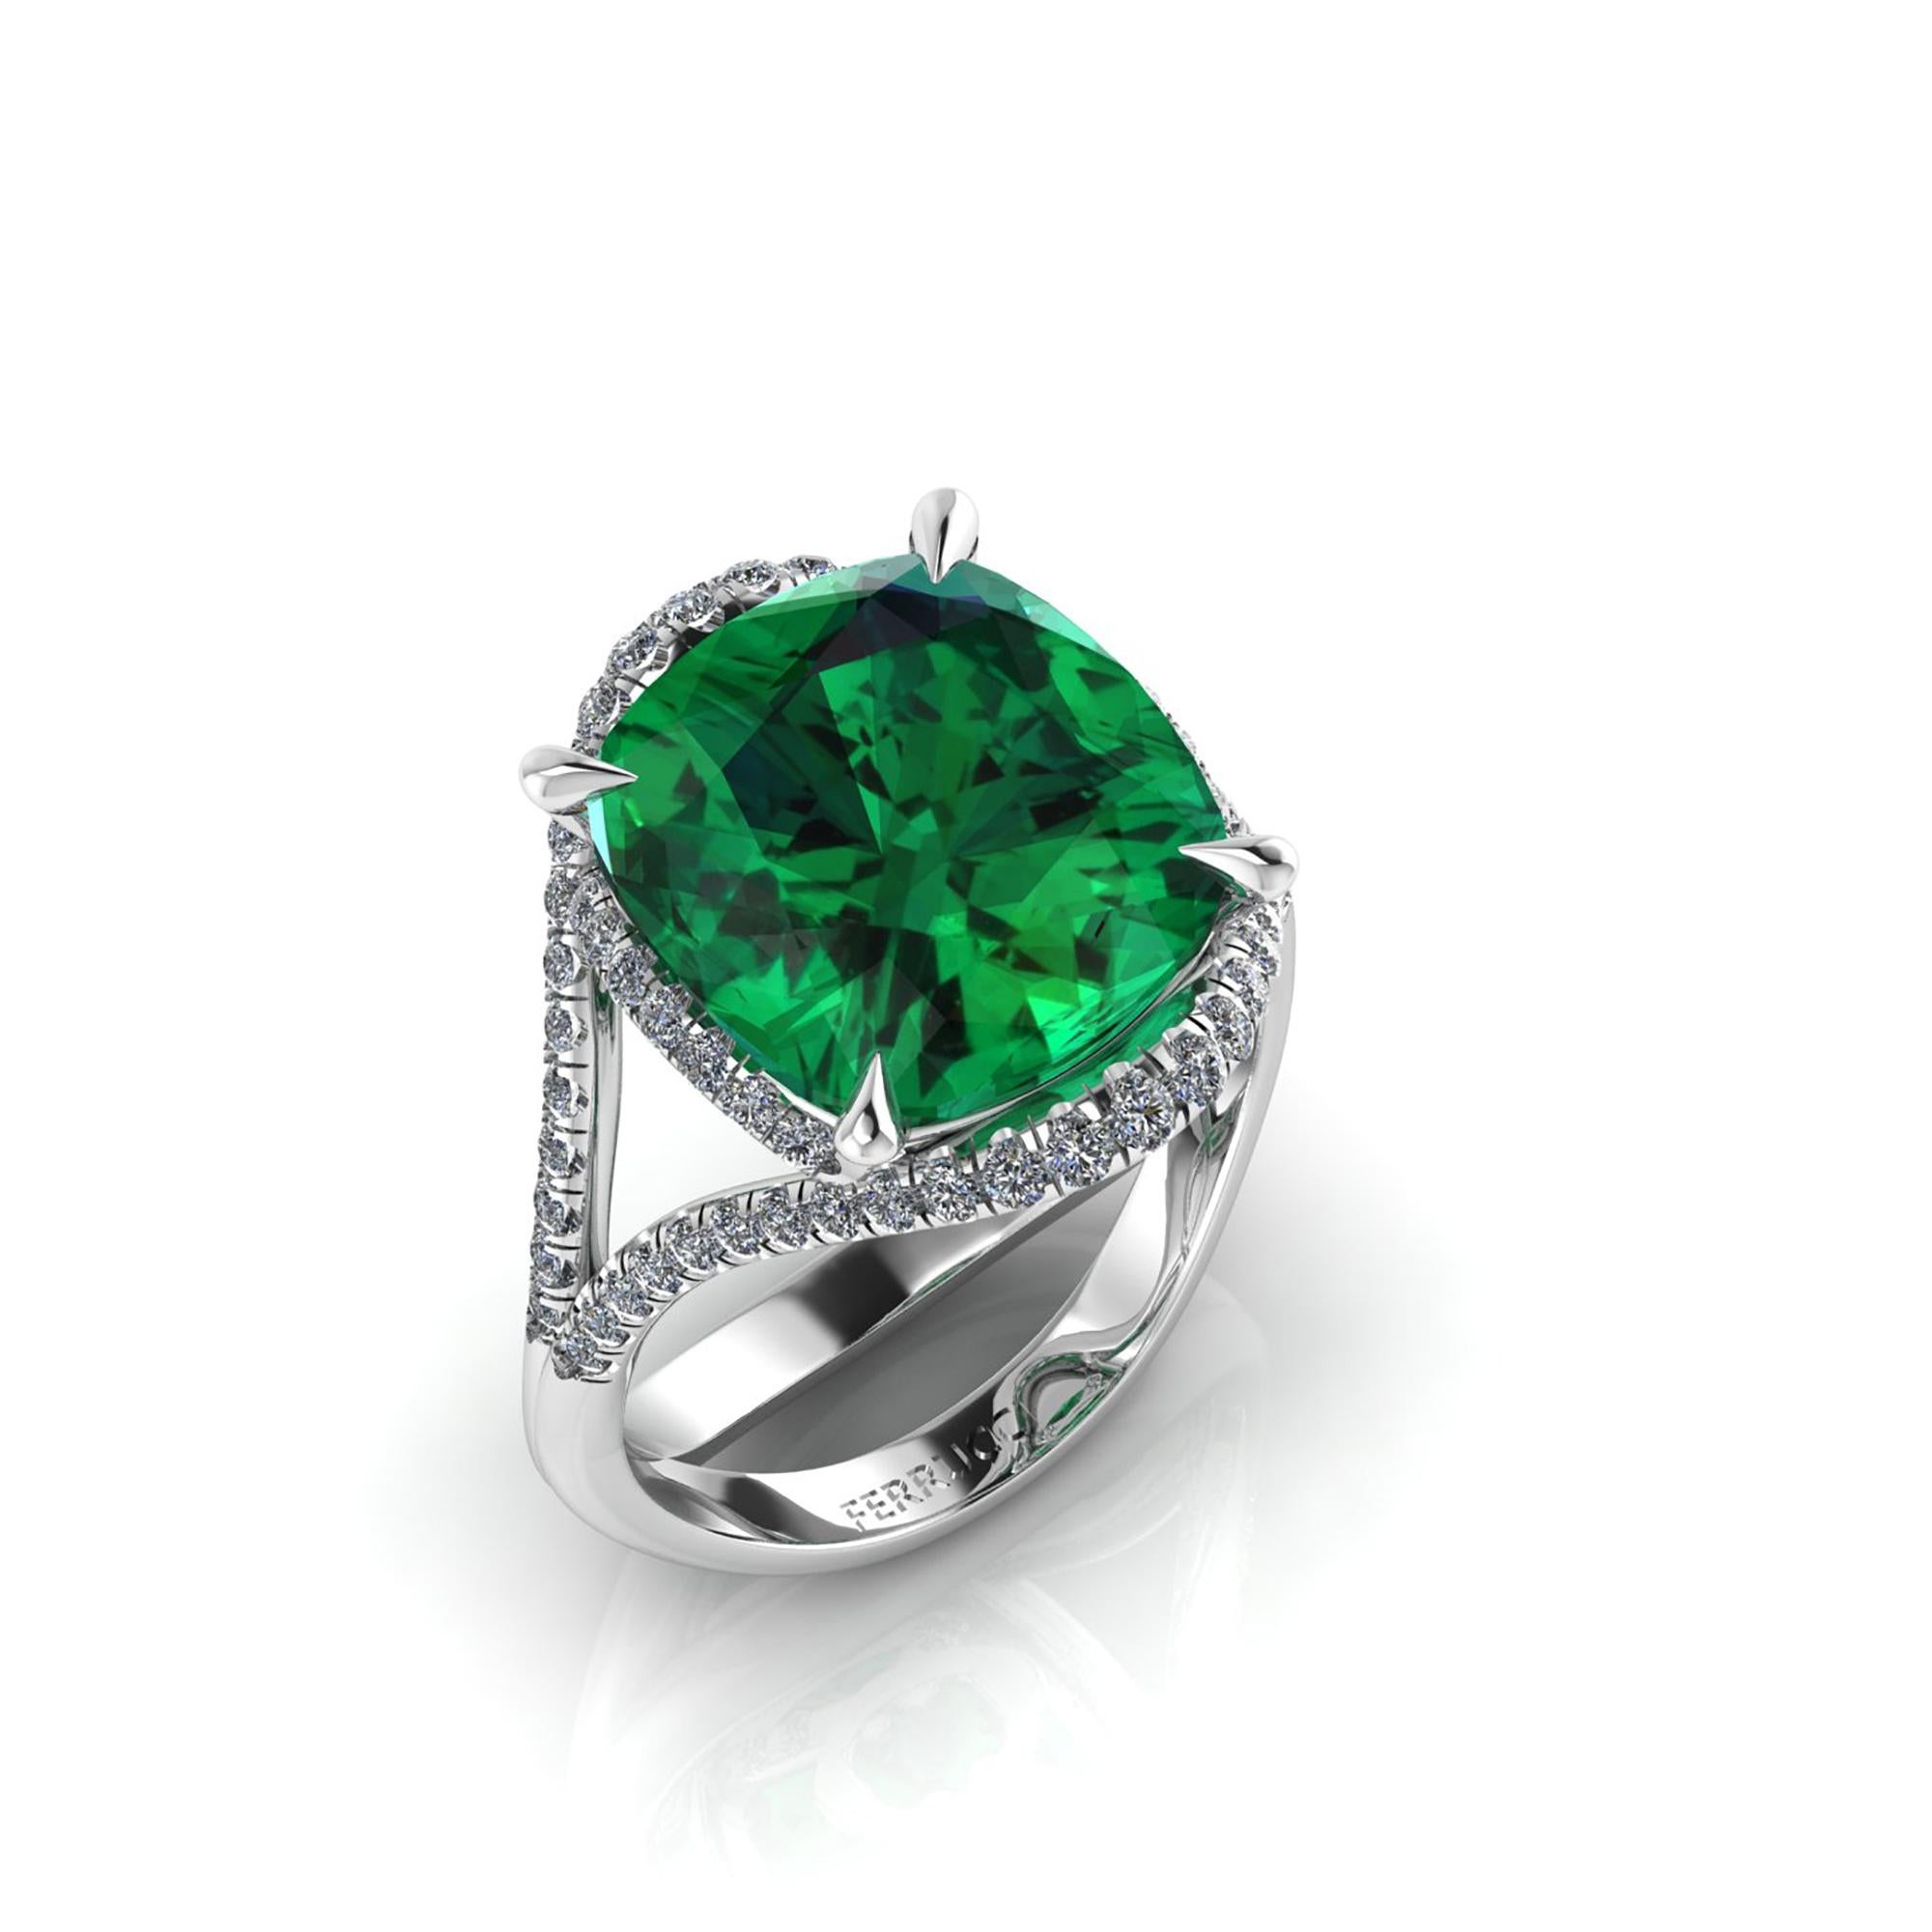  5 deep electric Green natural Tourmaline in a one of a kind, hand made Platinum 950, adorned by 0.60 carats of white diamonds pave, designed and conceived in New York City. 
This ring is made to order to guarantee the absolute immaculate conditions